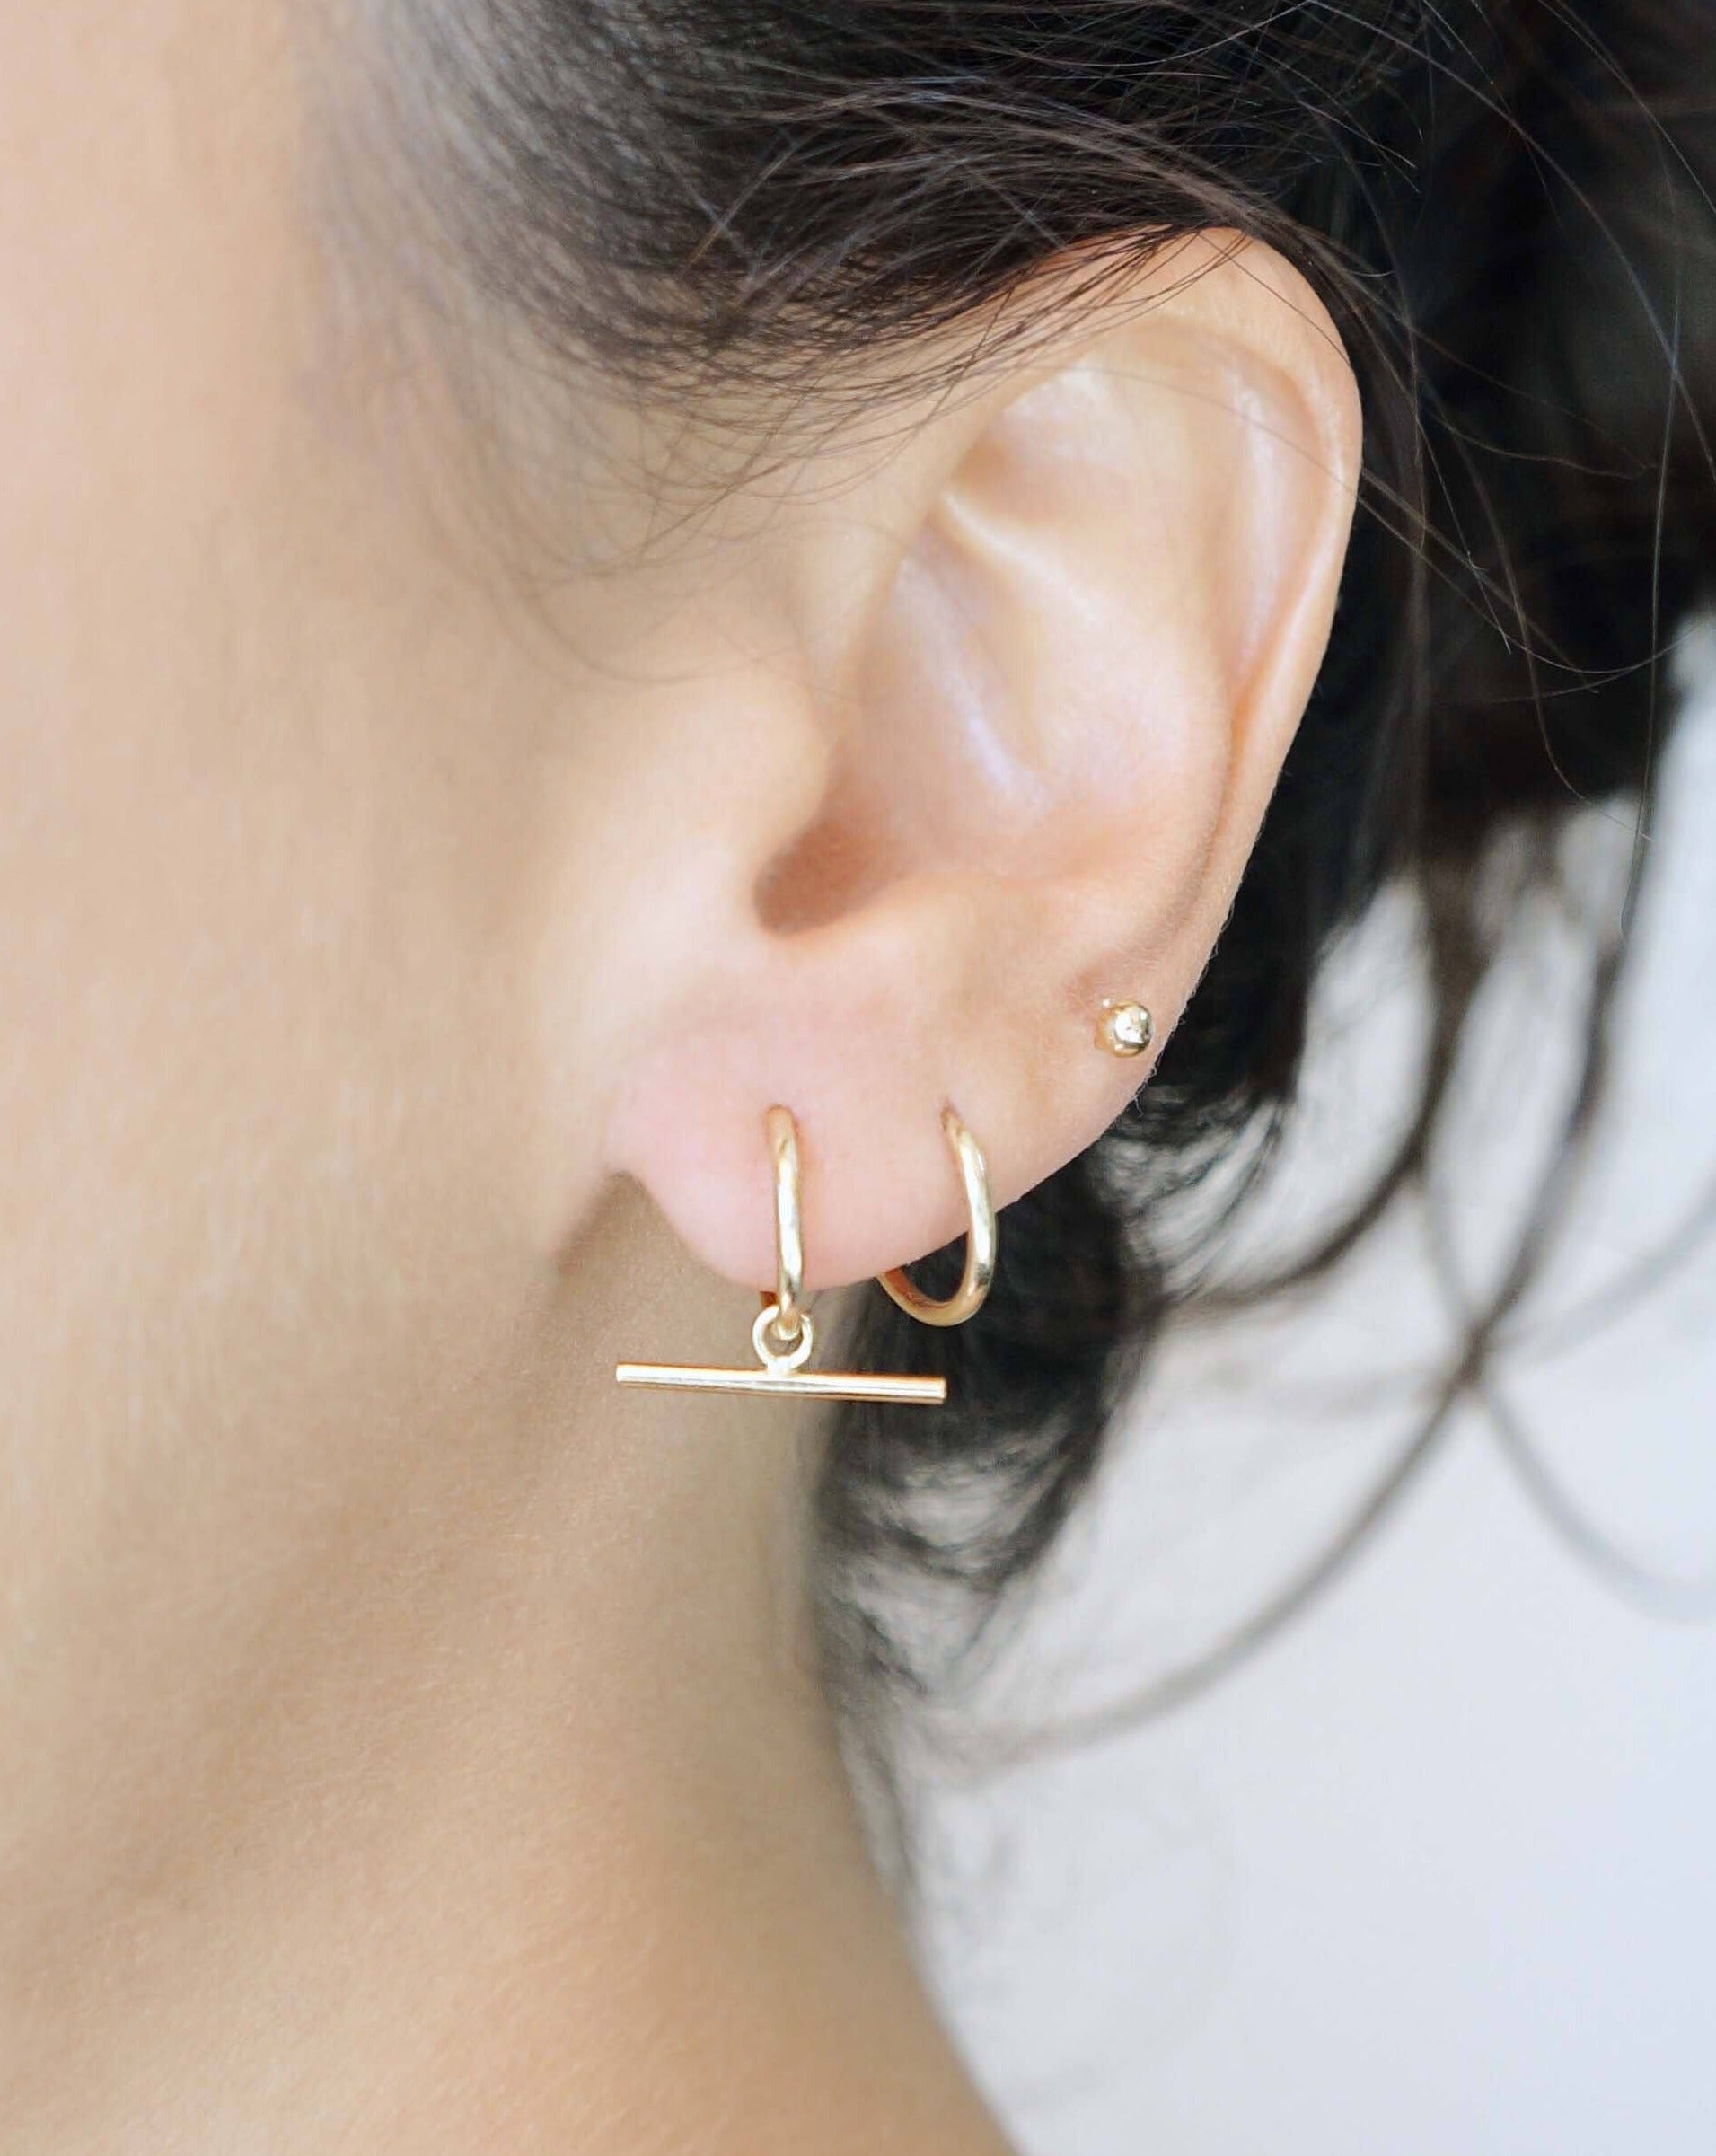 Arkis Earrings Earrings by KOZAKH. 12mm hoop earrings, crafted in 14K Gold Filled,  with seamless closure and with hanging horizontal bar stick.